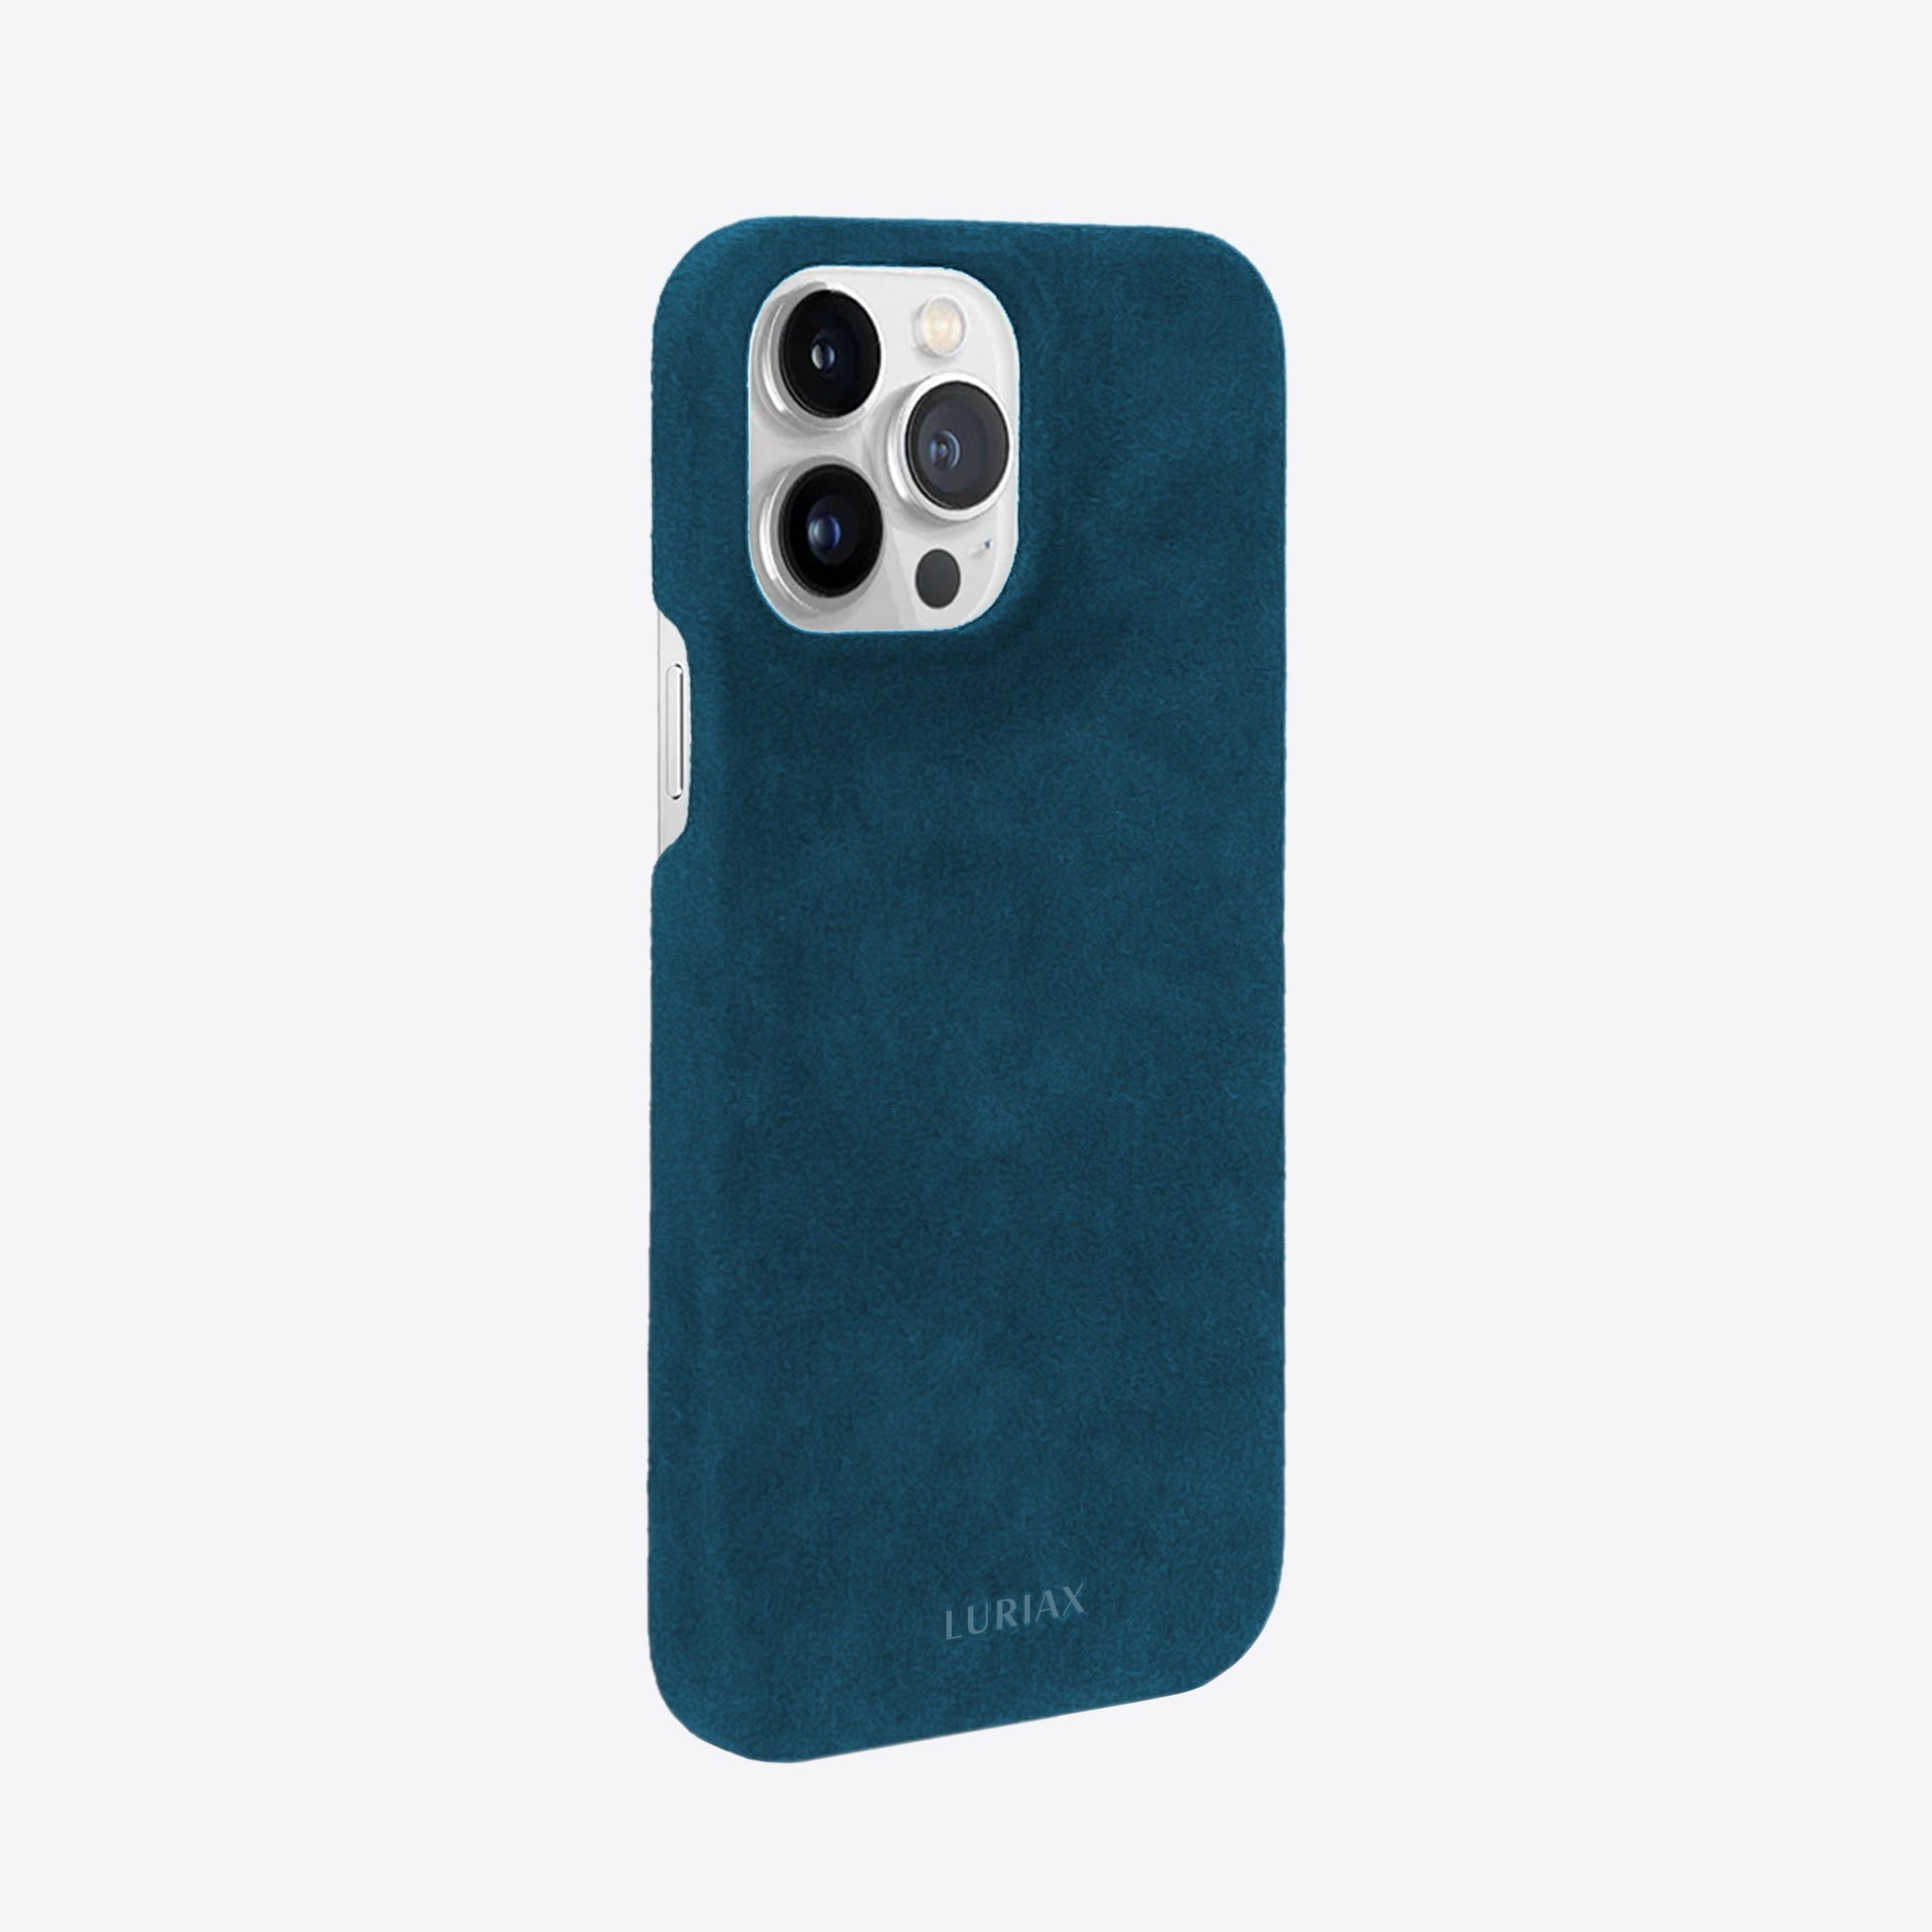 Alcantara Suede Leather iPhone Case and Accessories Collection - The Sport iPhone 14 & 14 Plus Case - Prussian Blue - Luriax